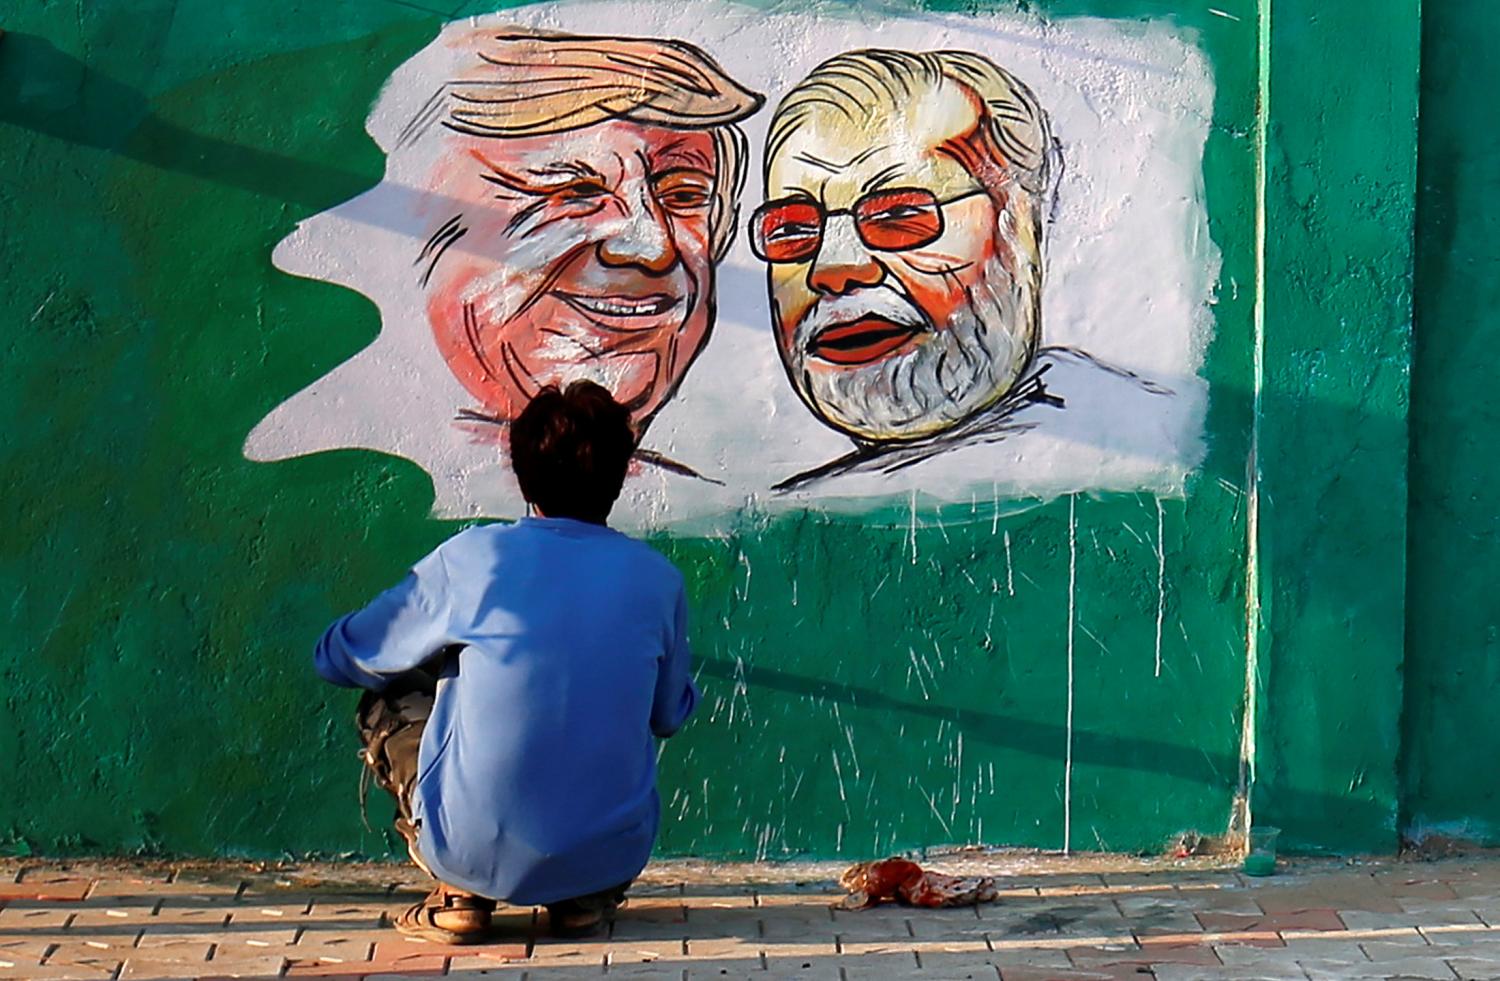 A man applies finishing touches to paintings of U.S. President Donald Trump and India's Prime Minister Narendra Modi on a wall as part of a beautification along a route that Trump and Modi will be taking during Trump's upcoming visit, in Ahmedabad, India, February 17, 2020. REUTERS/Amit Dave - RC2E2F9D35NB